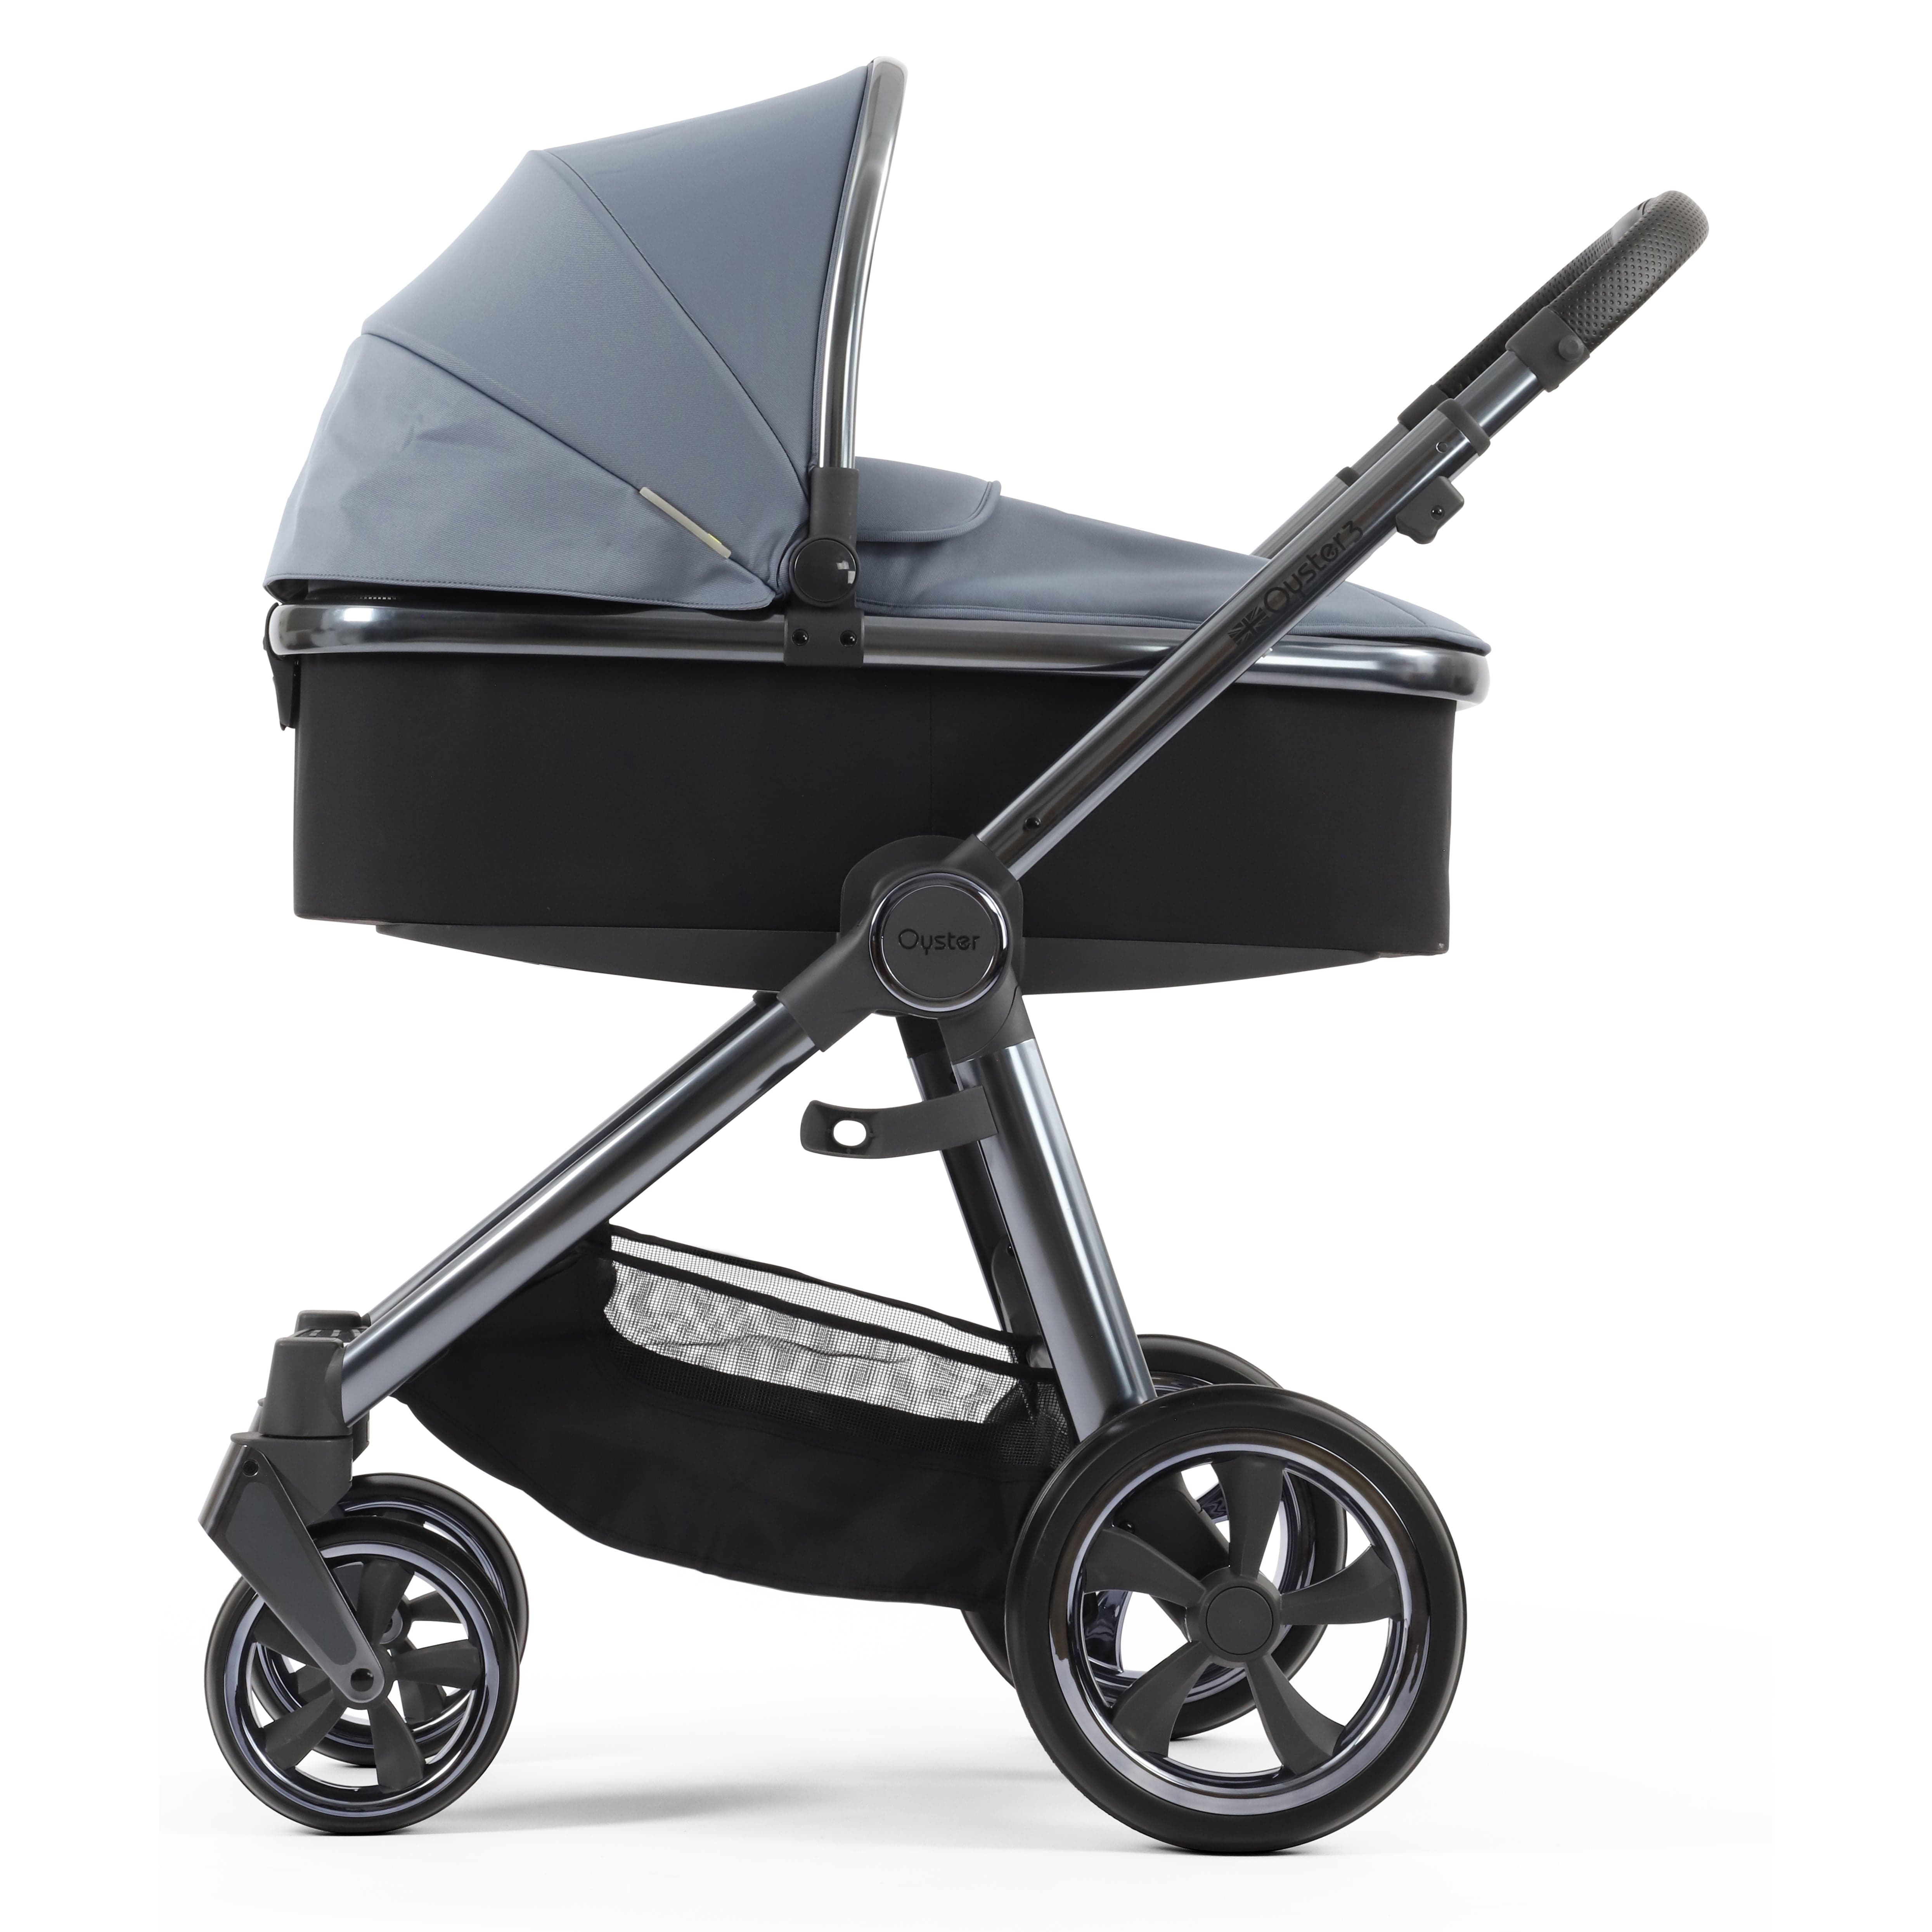 BabyStyle baby prams BabyStyle Oyster3 Pram & Carrycot Dream Blue 14731-DMB